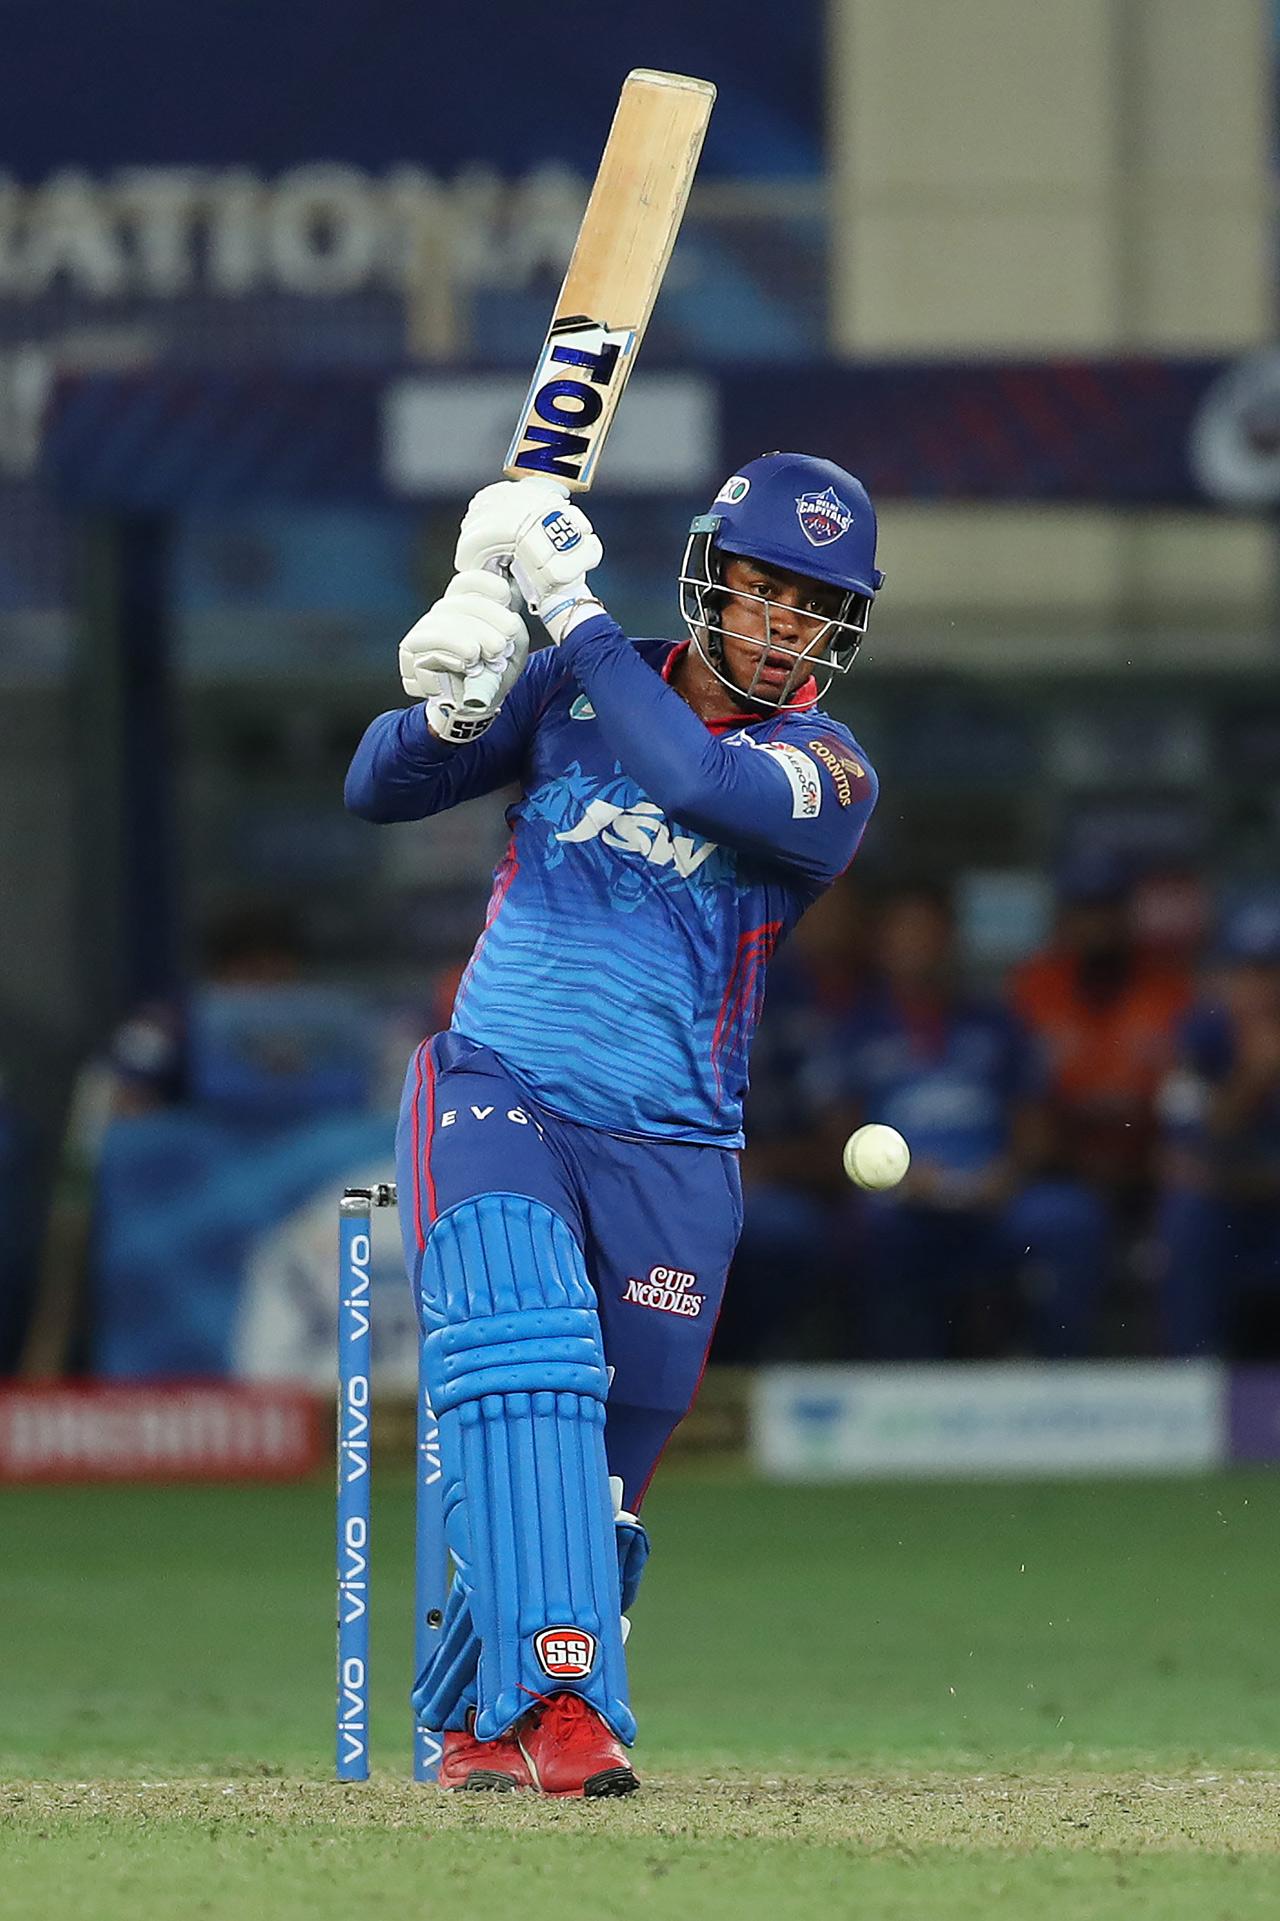 During Delhi Capitals' match against Chennai Super Kings, Axar Patel's 2/18 earned him the man-of-the-match, but it was Shimron Hetmyer's quickfire unbeaten 28 off 18 that helped DC bag a win and move atop the table